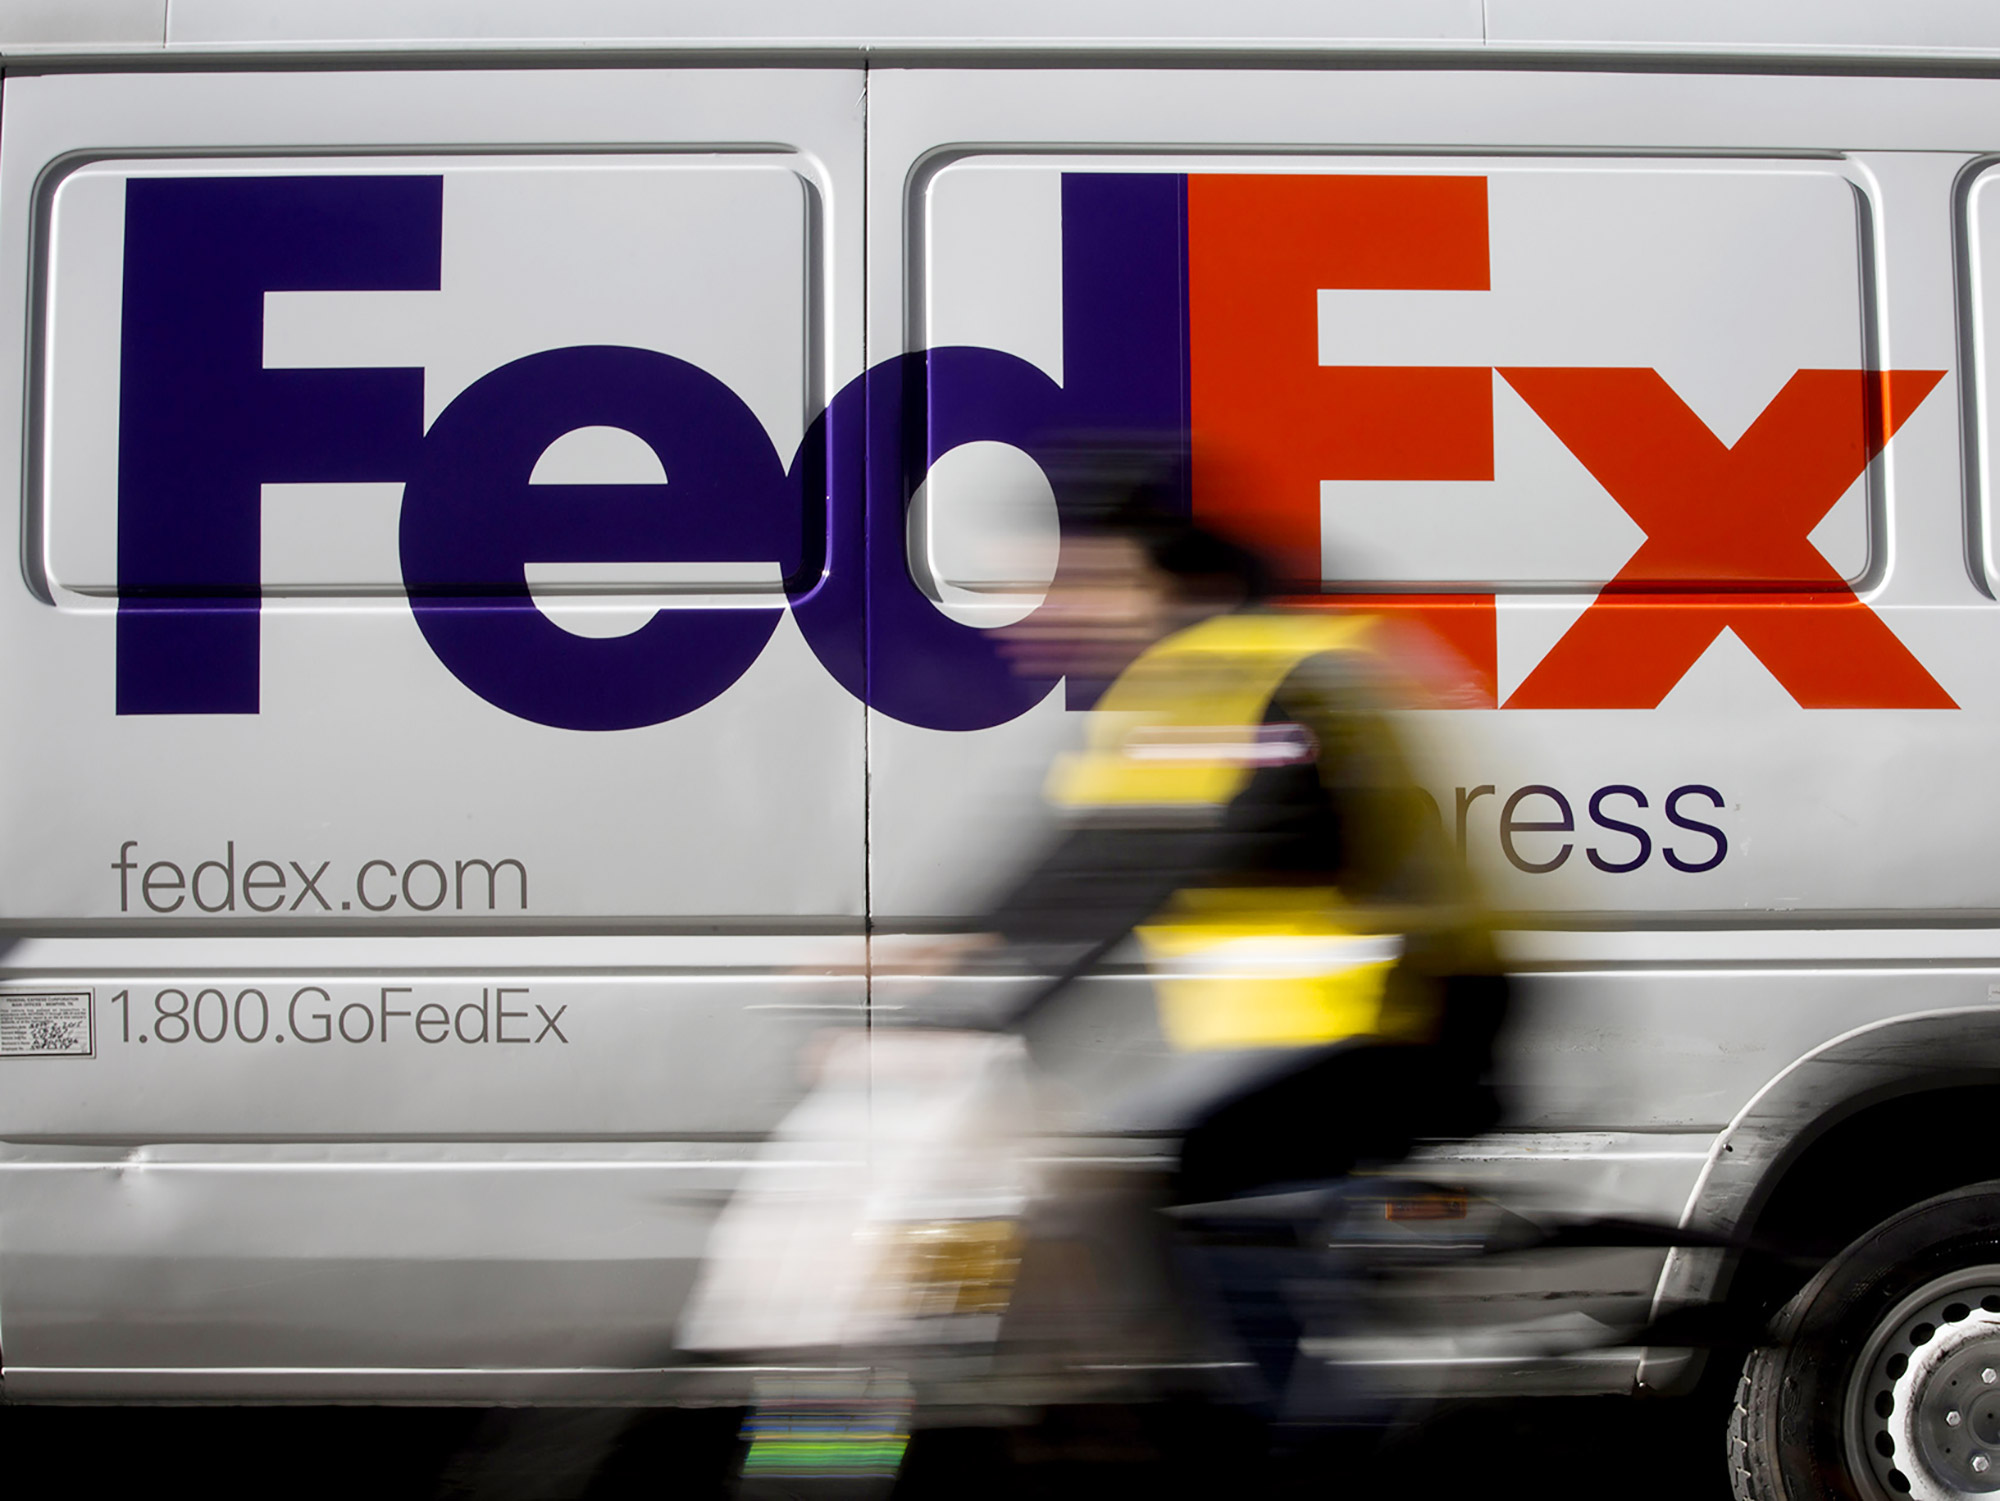 A bicyclist rides past a FedEx Corp. vehicle parked in the Midtown neighborhood of New York.&nbsp;